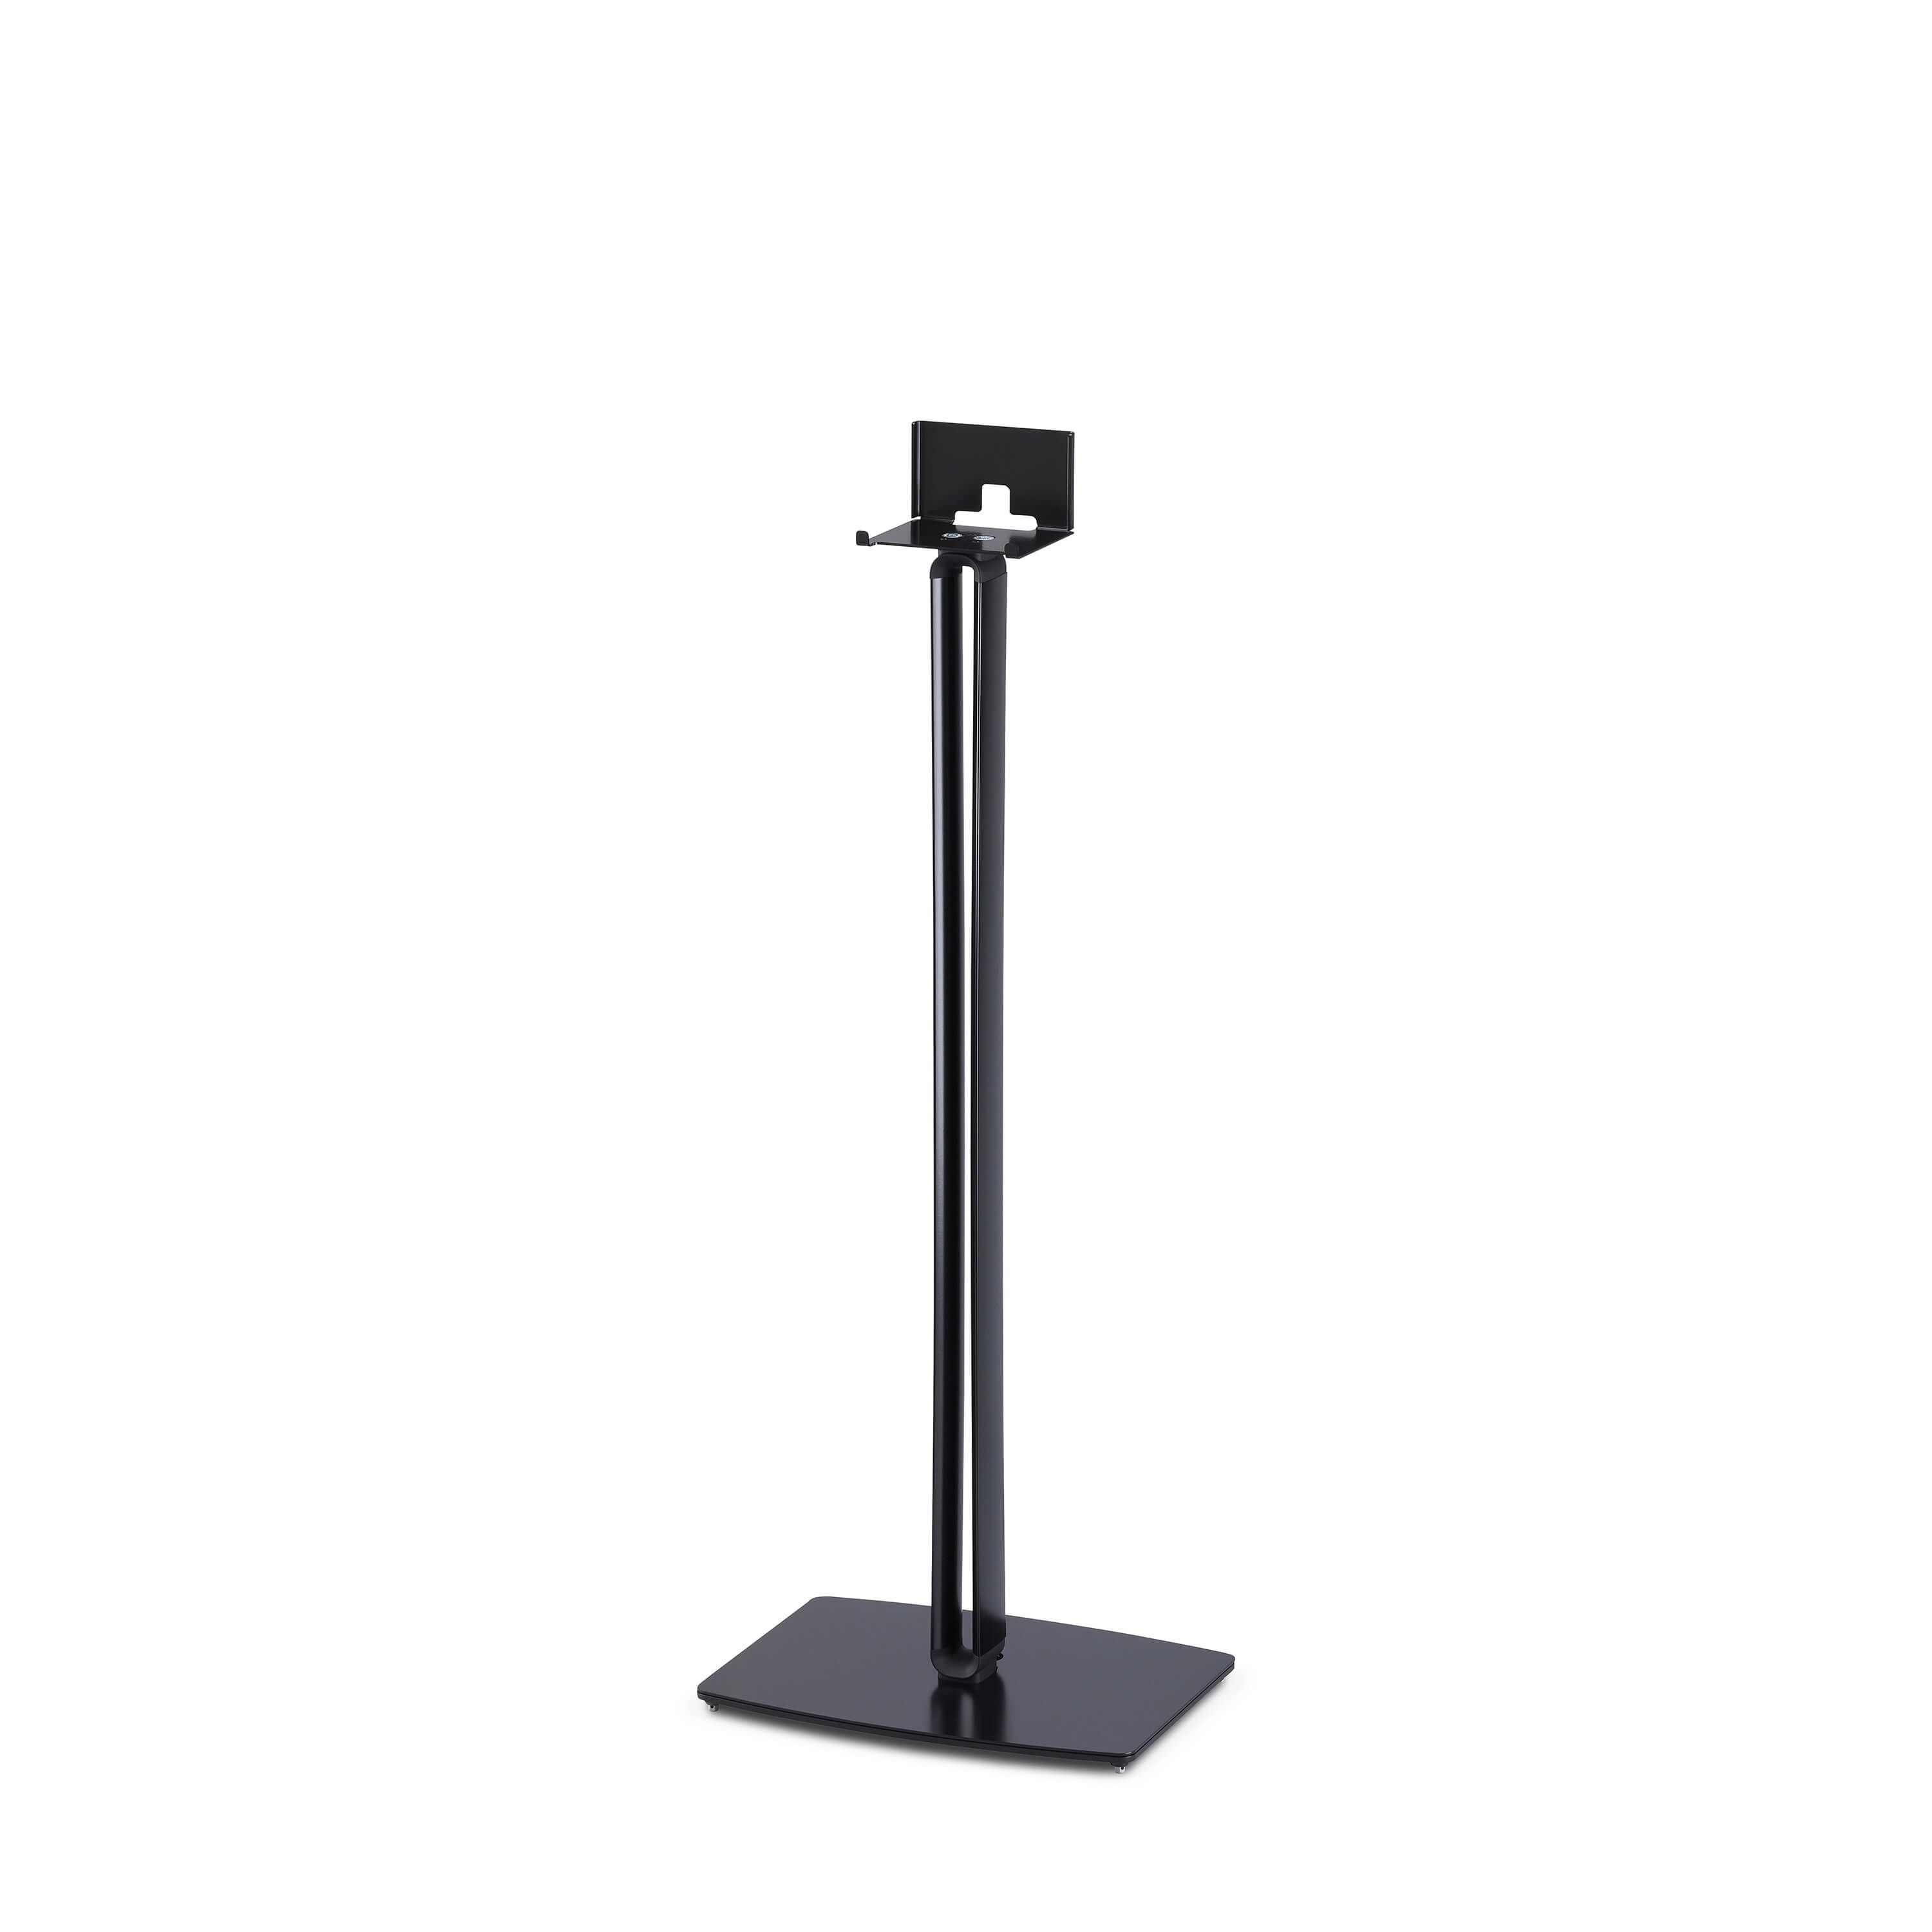 SoundXtra BOSE SOUNDTOUCH 10 Floor Stand black Singel